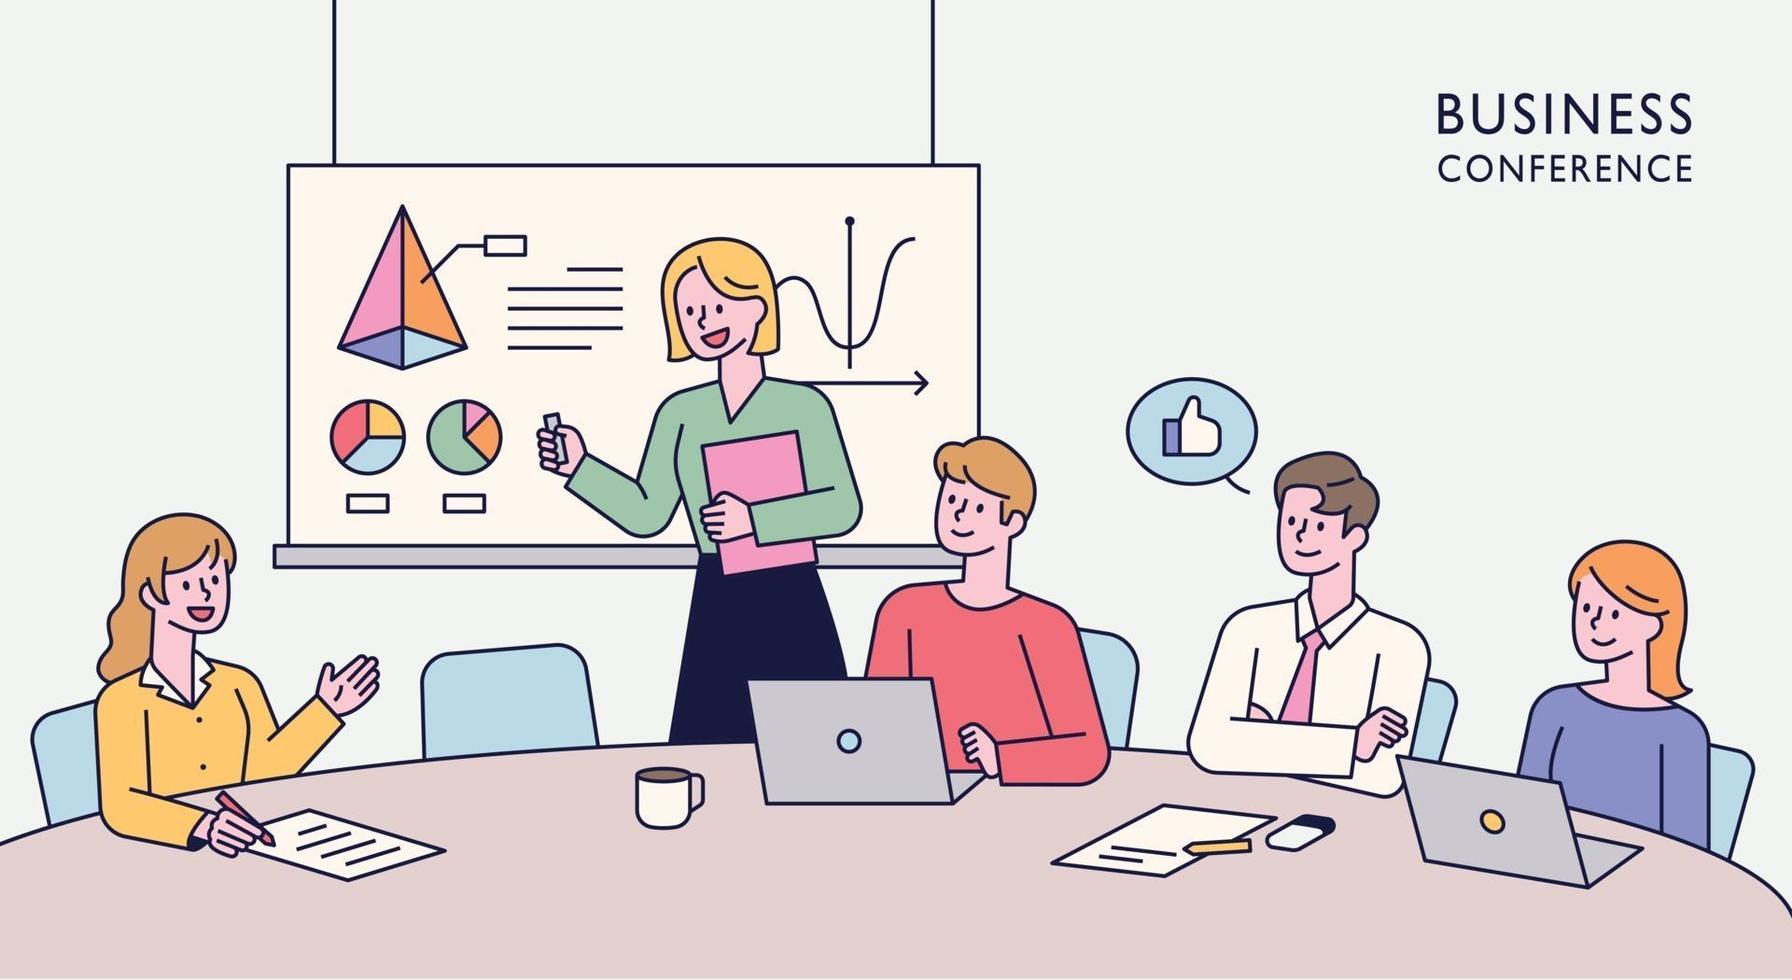 Team members are sitting together at a table and having an idea meeting. One person is standing up and giving a presentation. flat design style minimal vector illustration.